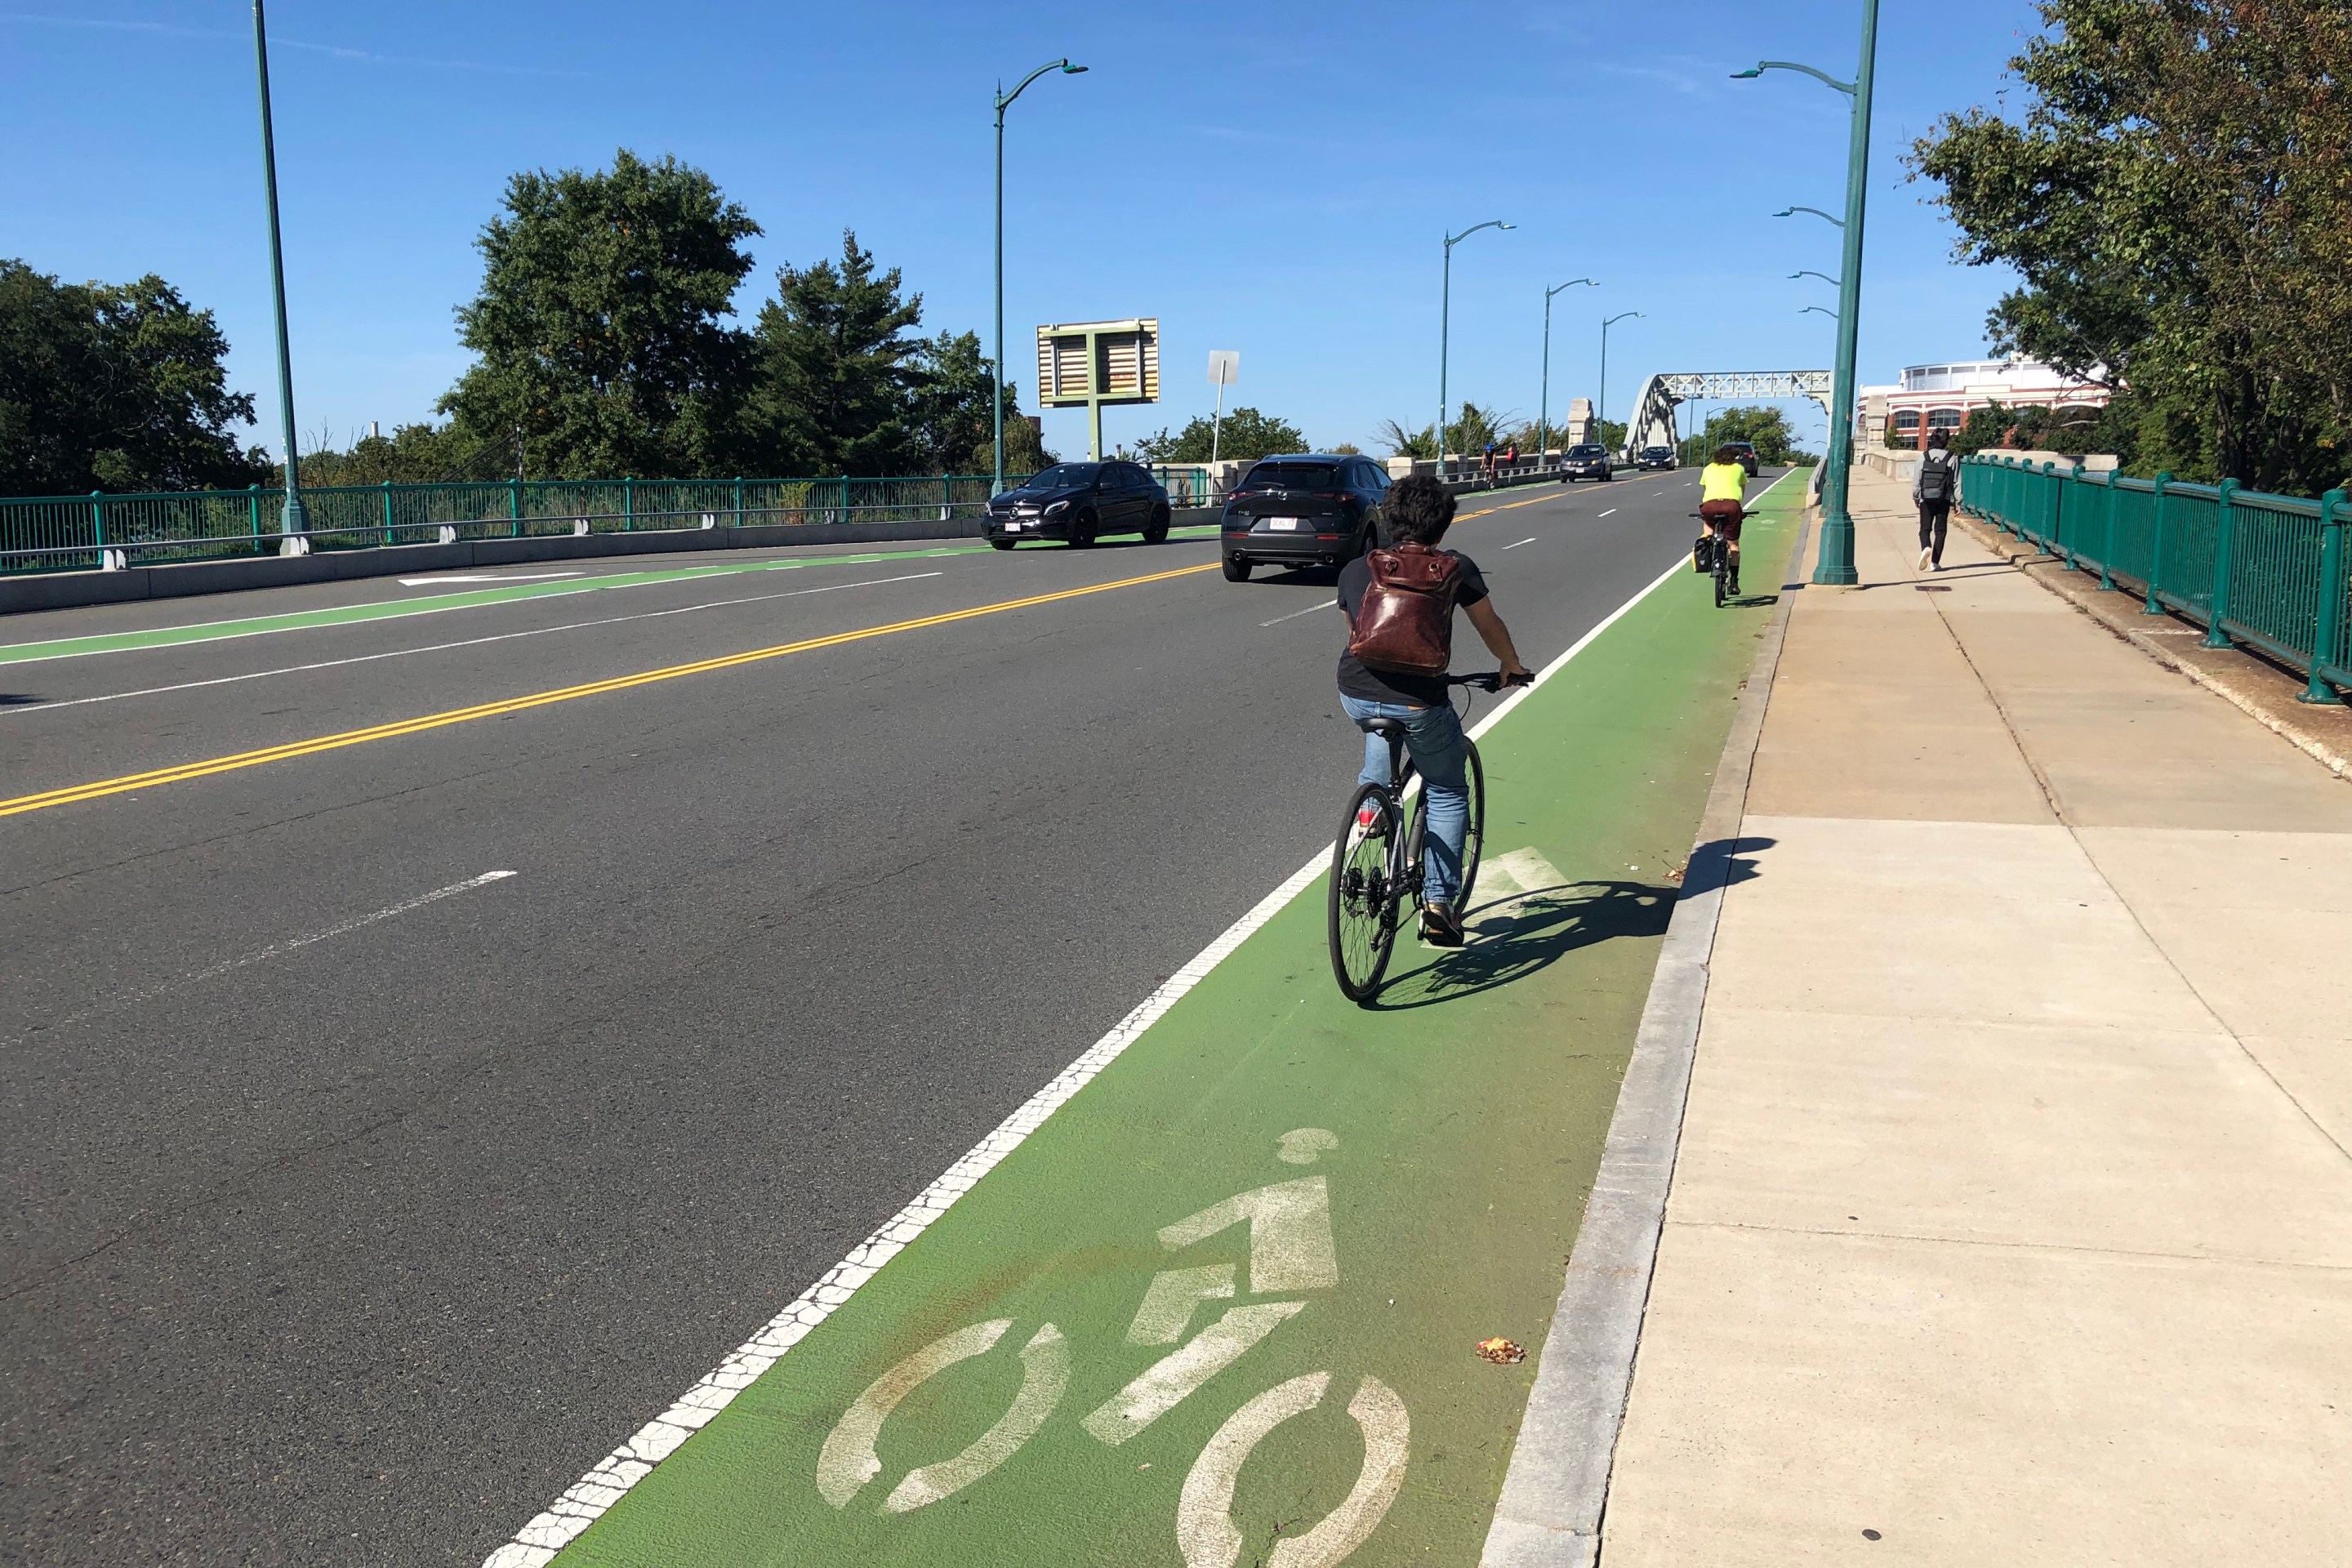 Two people on bikes ride on a green-painted bike lane towards an arched bridge on the horizon. Next to them are four lanes for motor vehicles being used by two cars, and a wide sidewalk on their right.